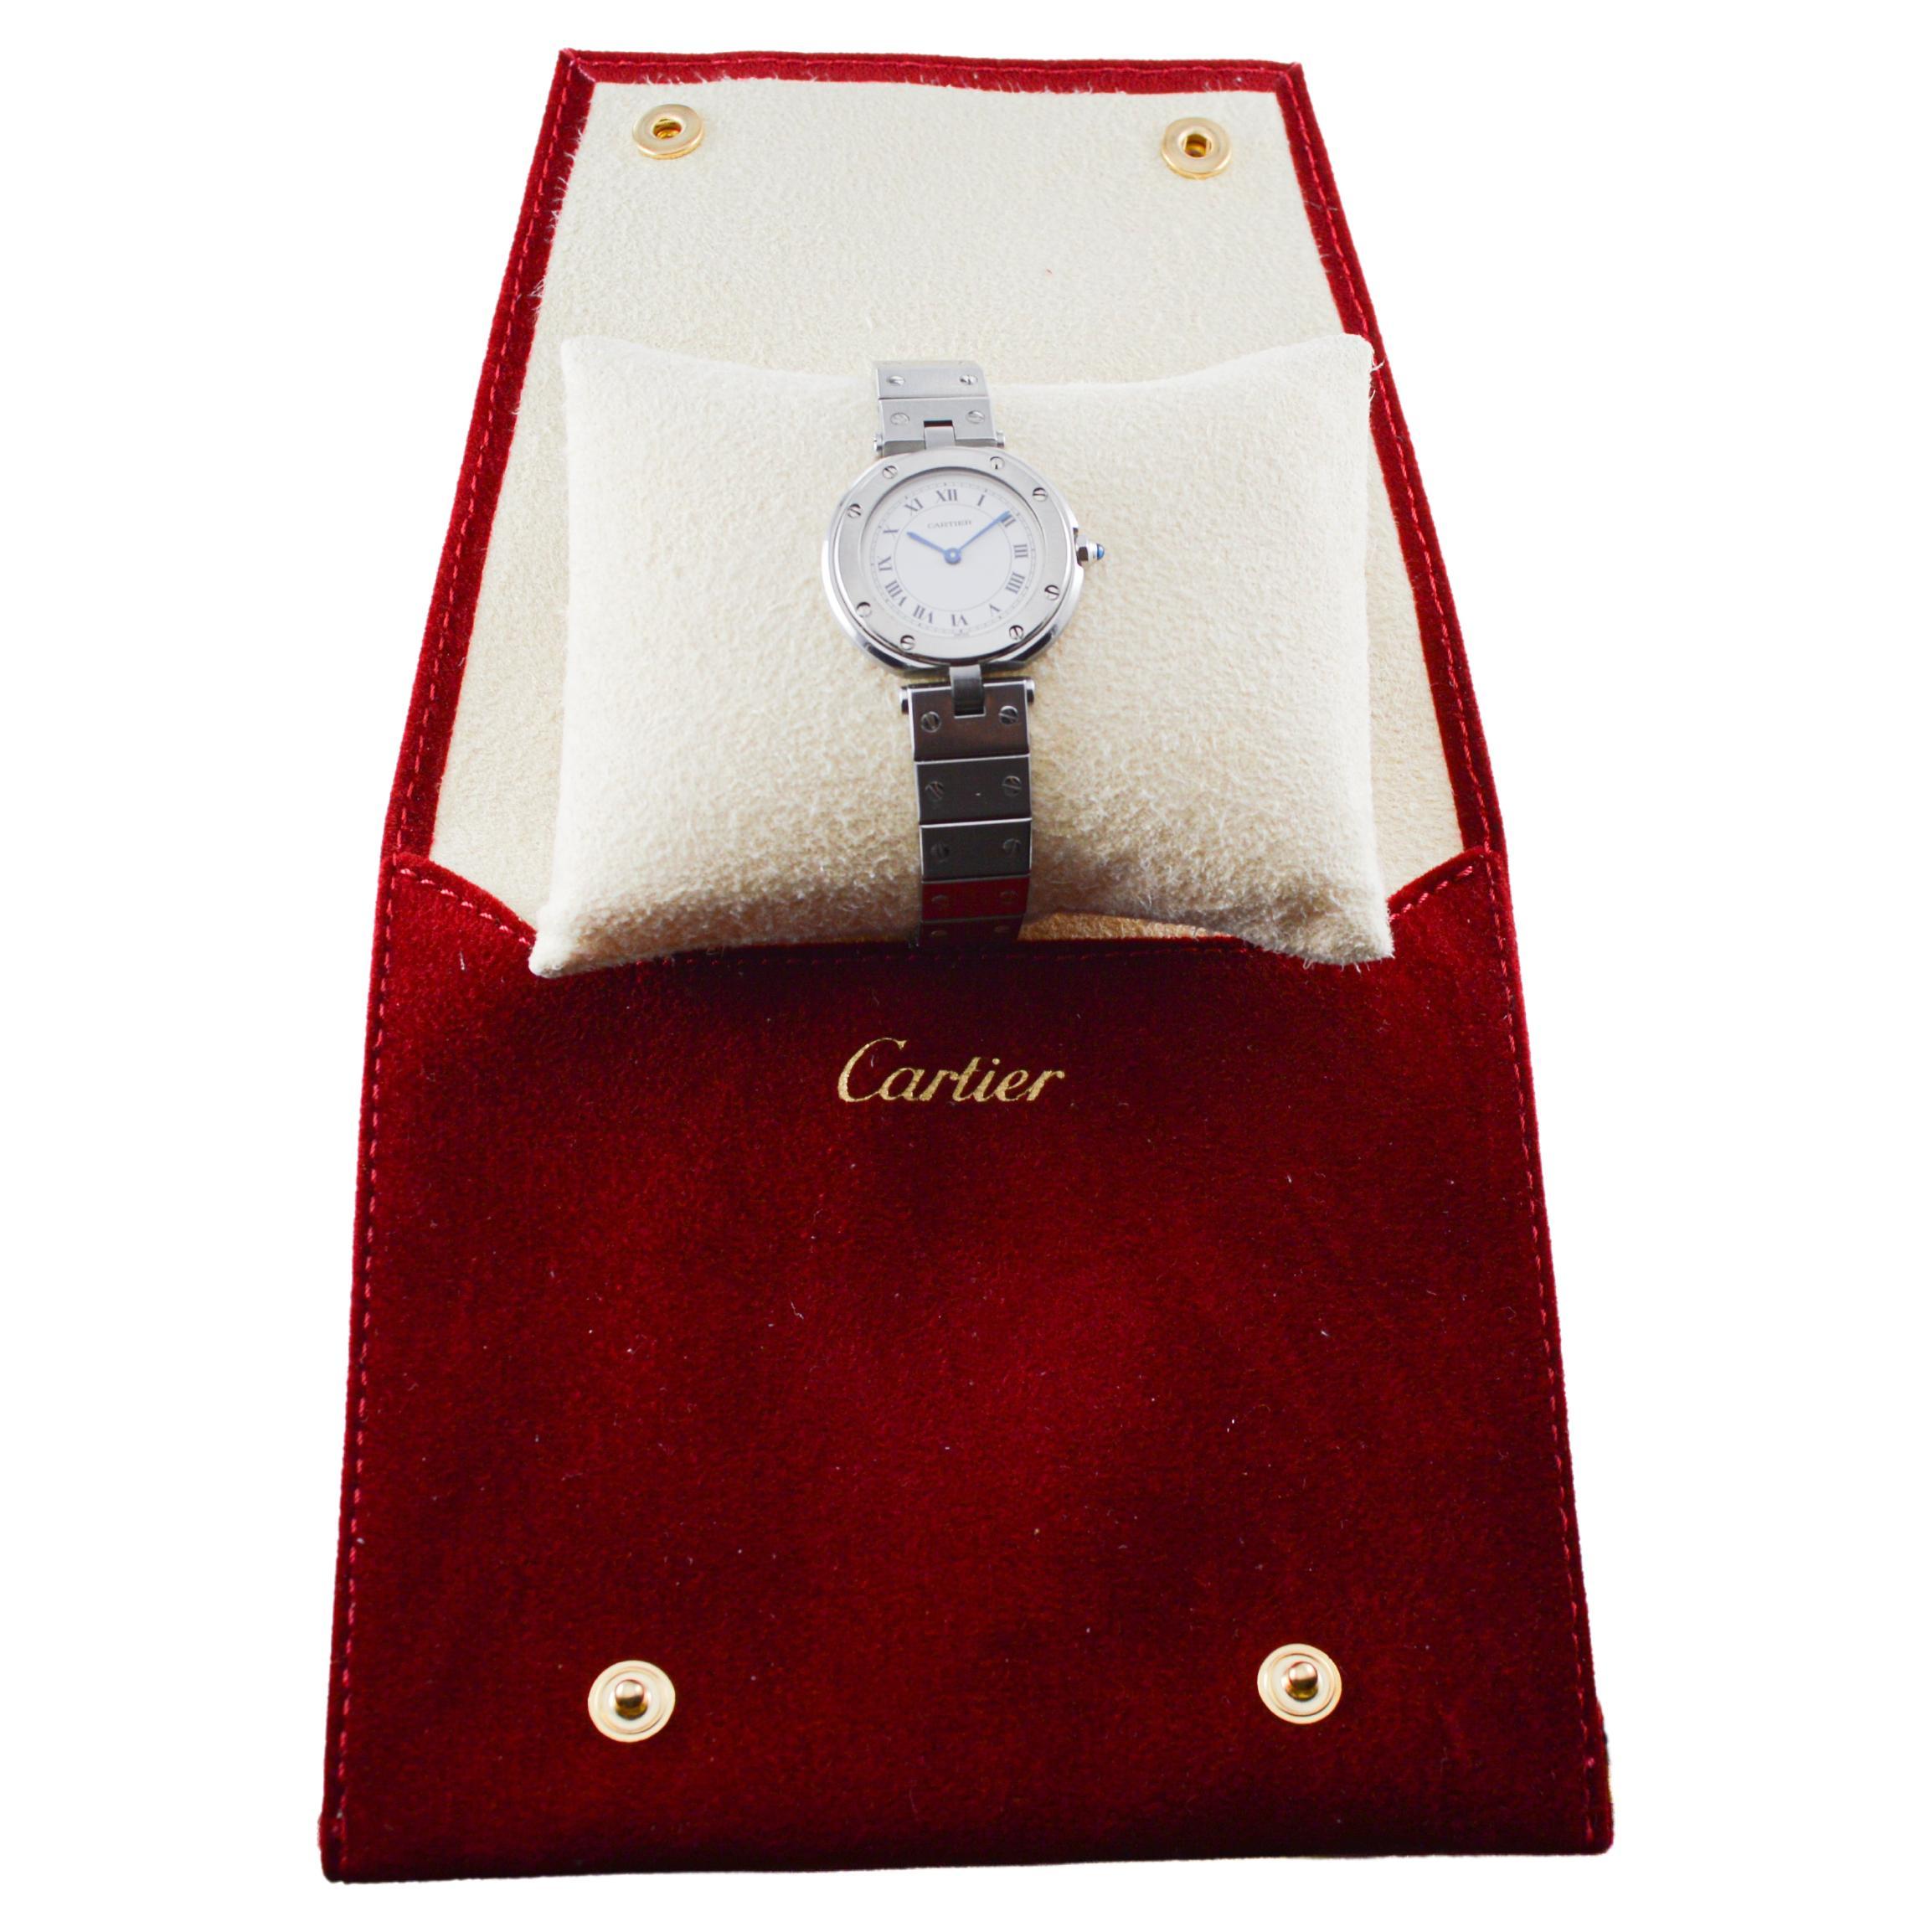 FACTORY / HOUSE: Cartier Watch Company
STYLE / REFERENCE: Centre / Santos Series 
METAL / MATERIAL: Stainless Steel
CIRCA / YEAR: 2000
DIMENSIONS / SIZE: Length 33mm X Diameter 27mm
MOVEMENT / CALIBER: Quartz / 7 Jewels  
DIAL / HANDS: Original